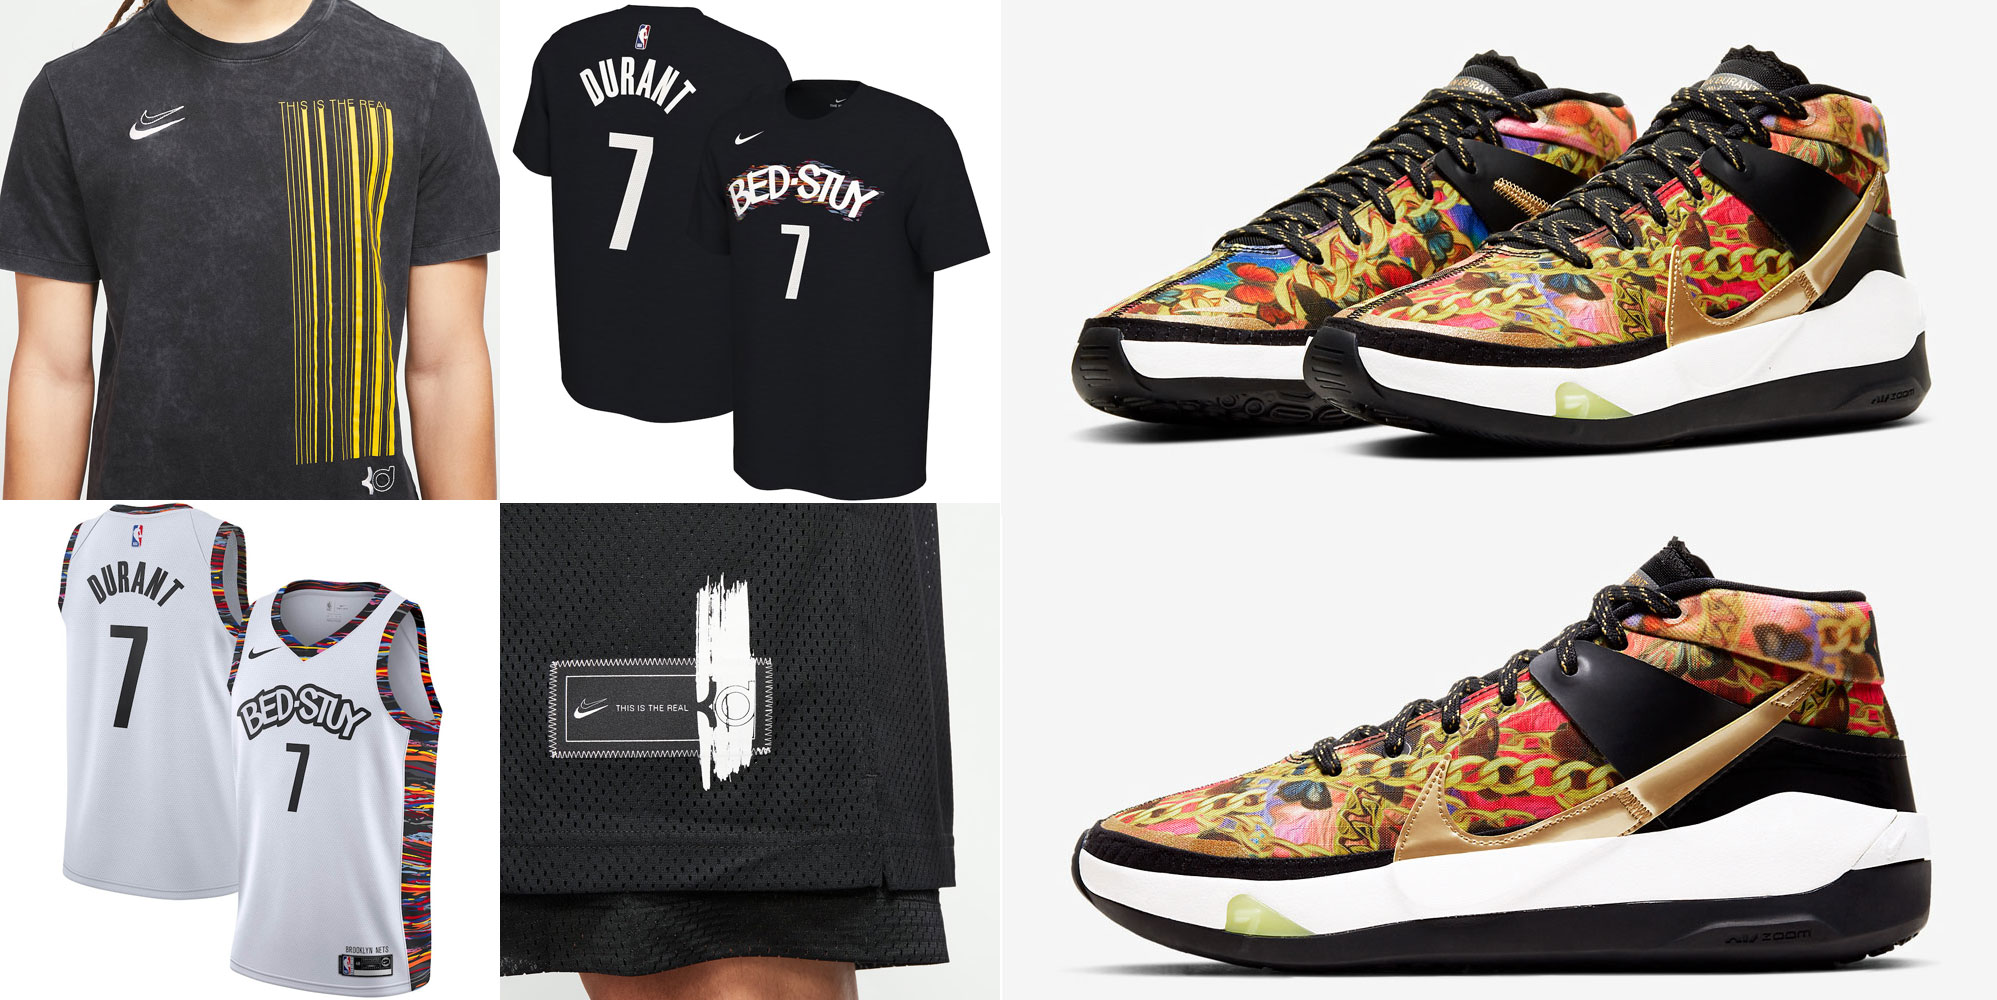 nike-kd-13-hype-sneaker-outfits